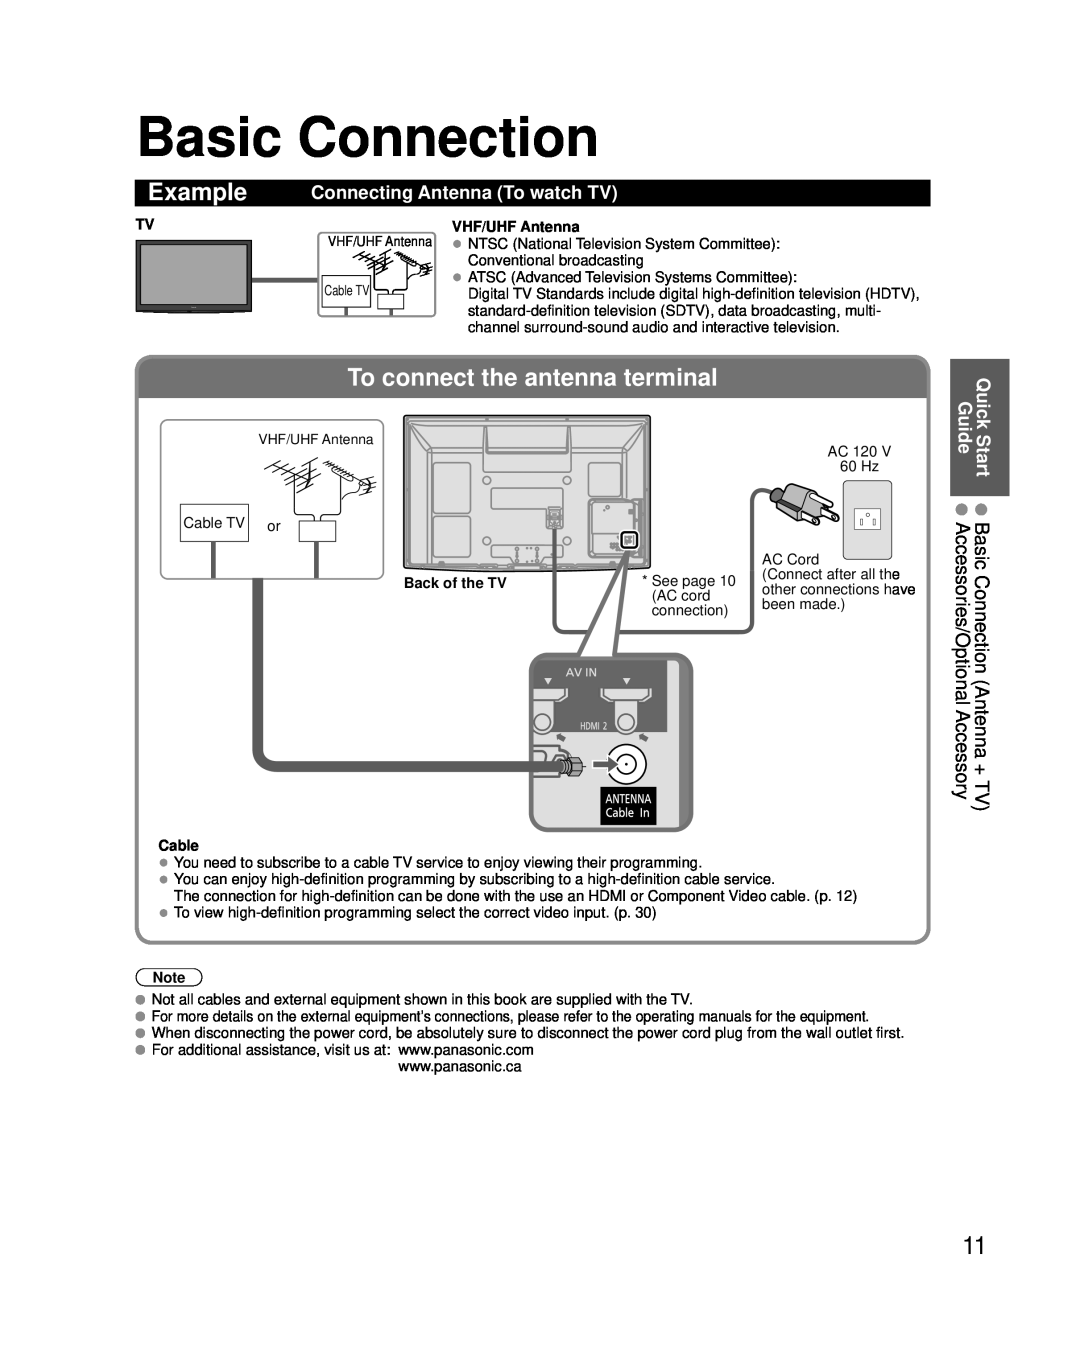 Panasonic TC-P54G25 Basic Connection, Example, To connect the antenna terminal, Connecting Antenna To watch TV, Start 